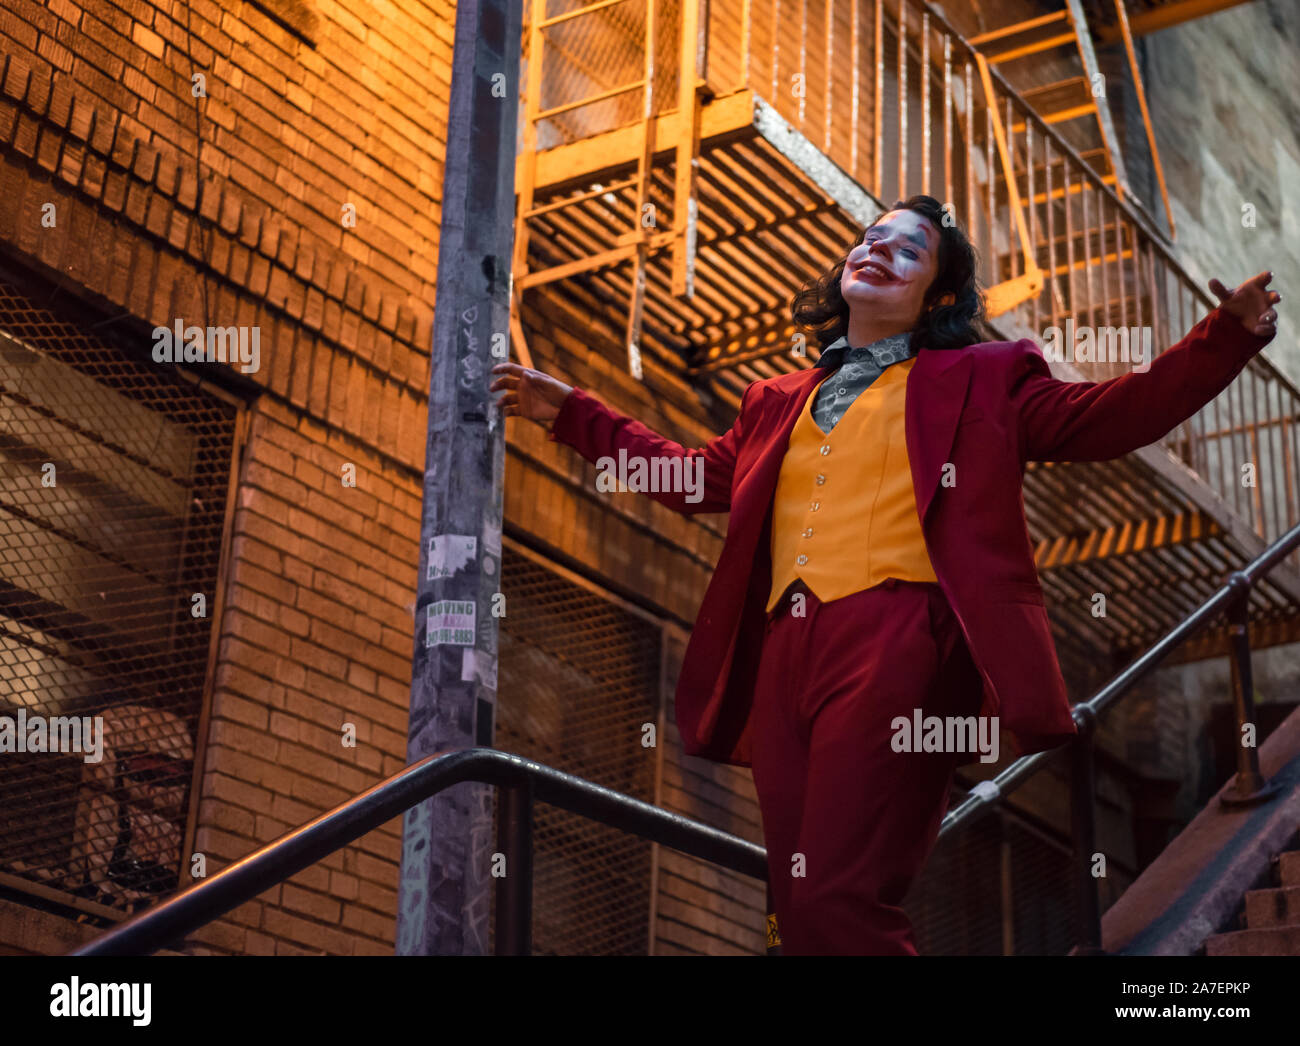 NEW YORK, USA,-NOVEMBER 31,2019: Random person impersonating the Joker and dancing at staircase in the Bronx, New York Stock Photo